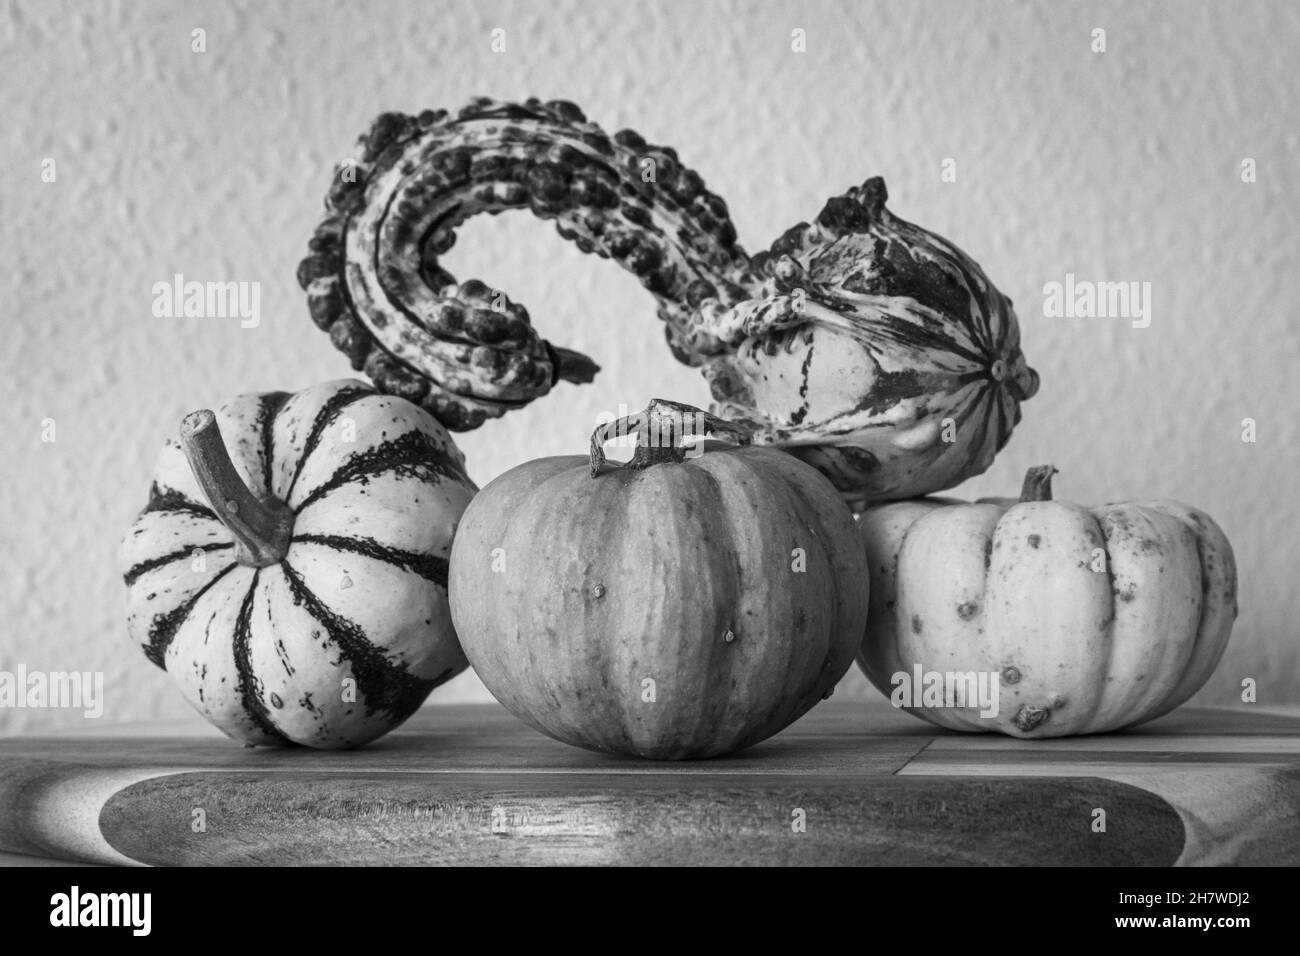 a collection mini pumpkins of various types and shapes on a wooden chopping board monochrome Stock Photo